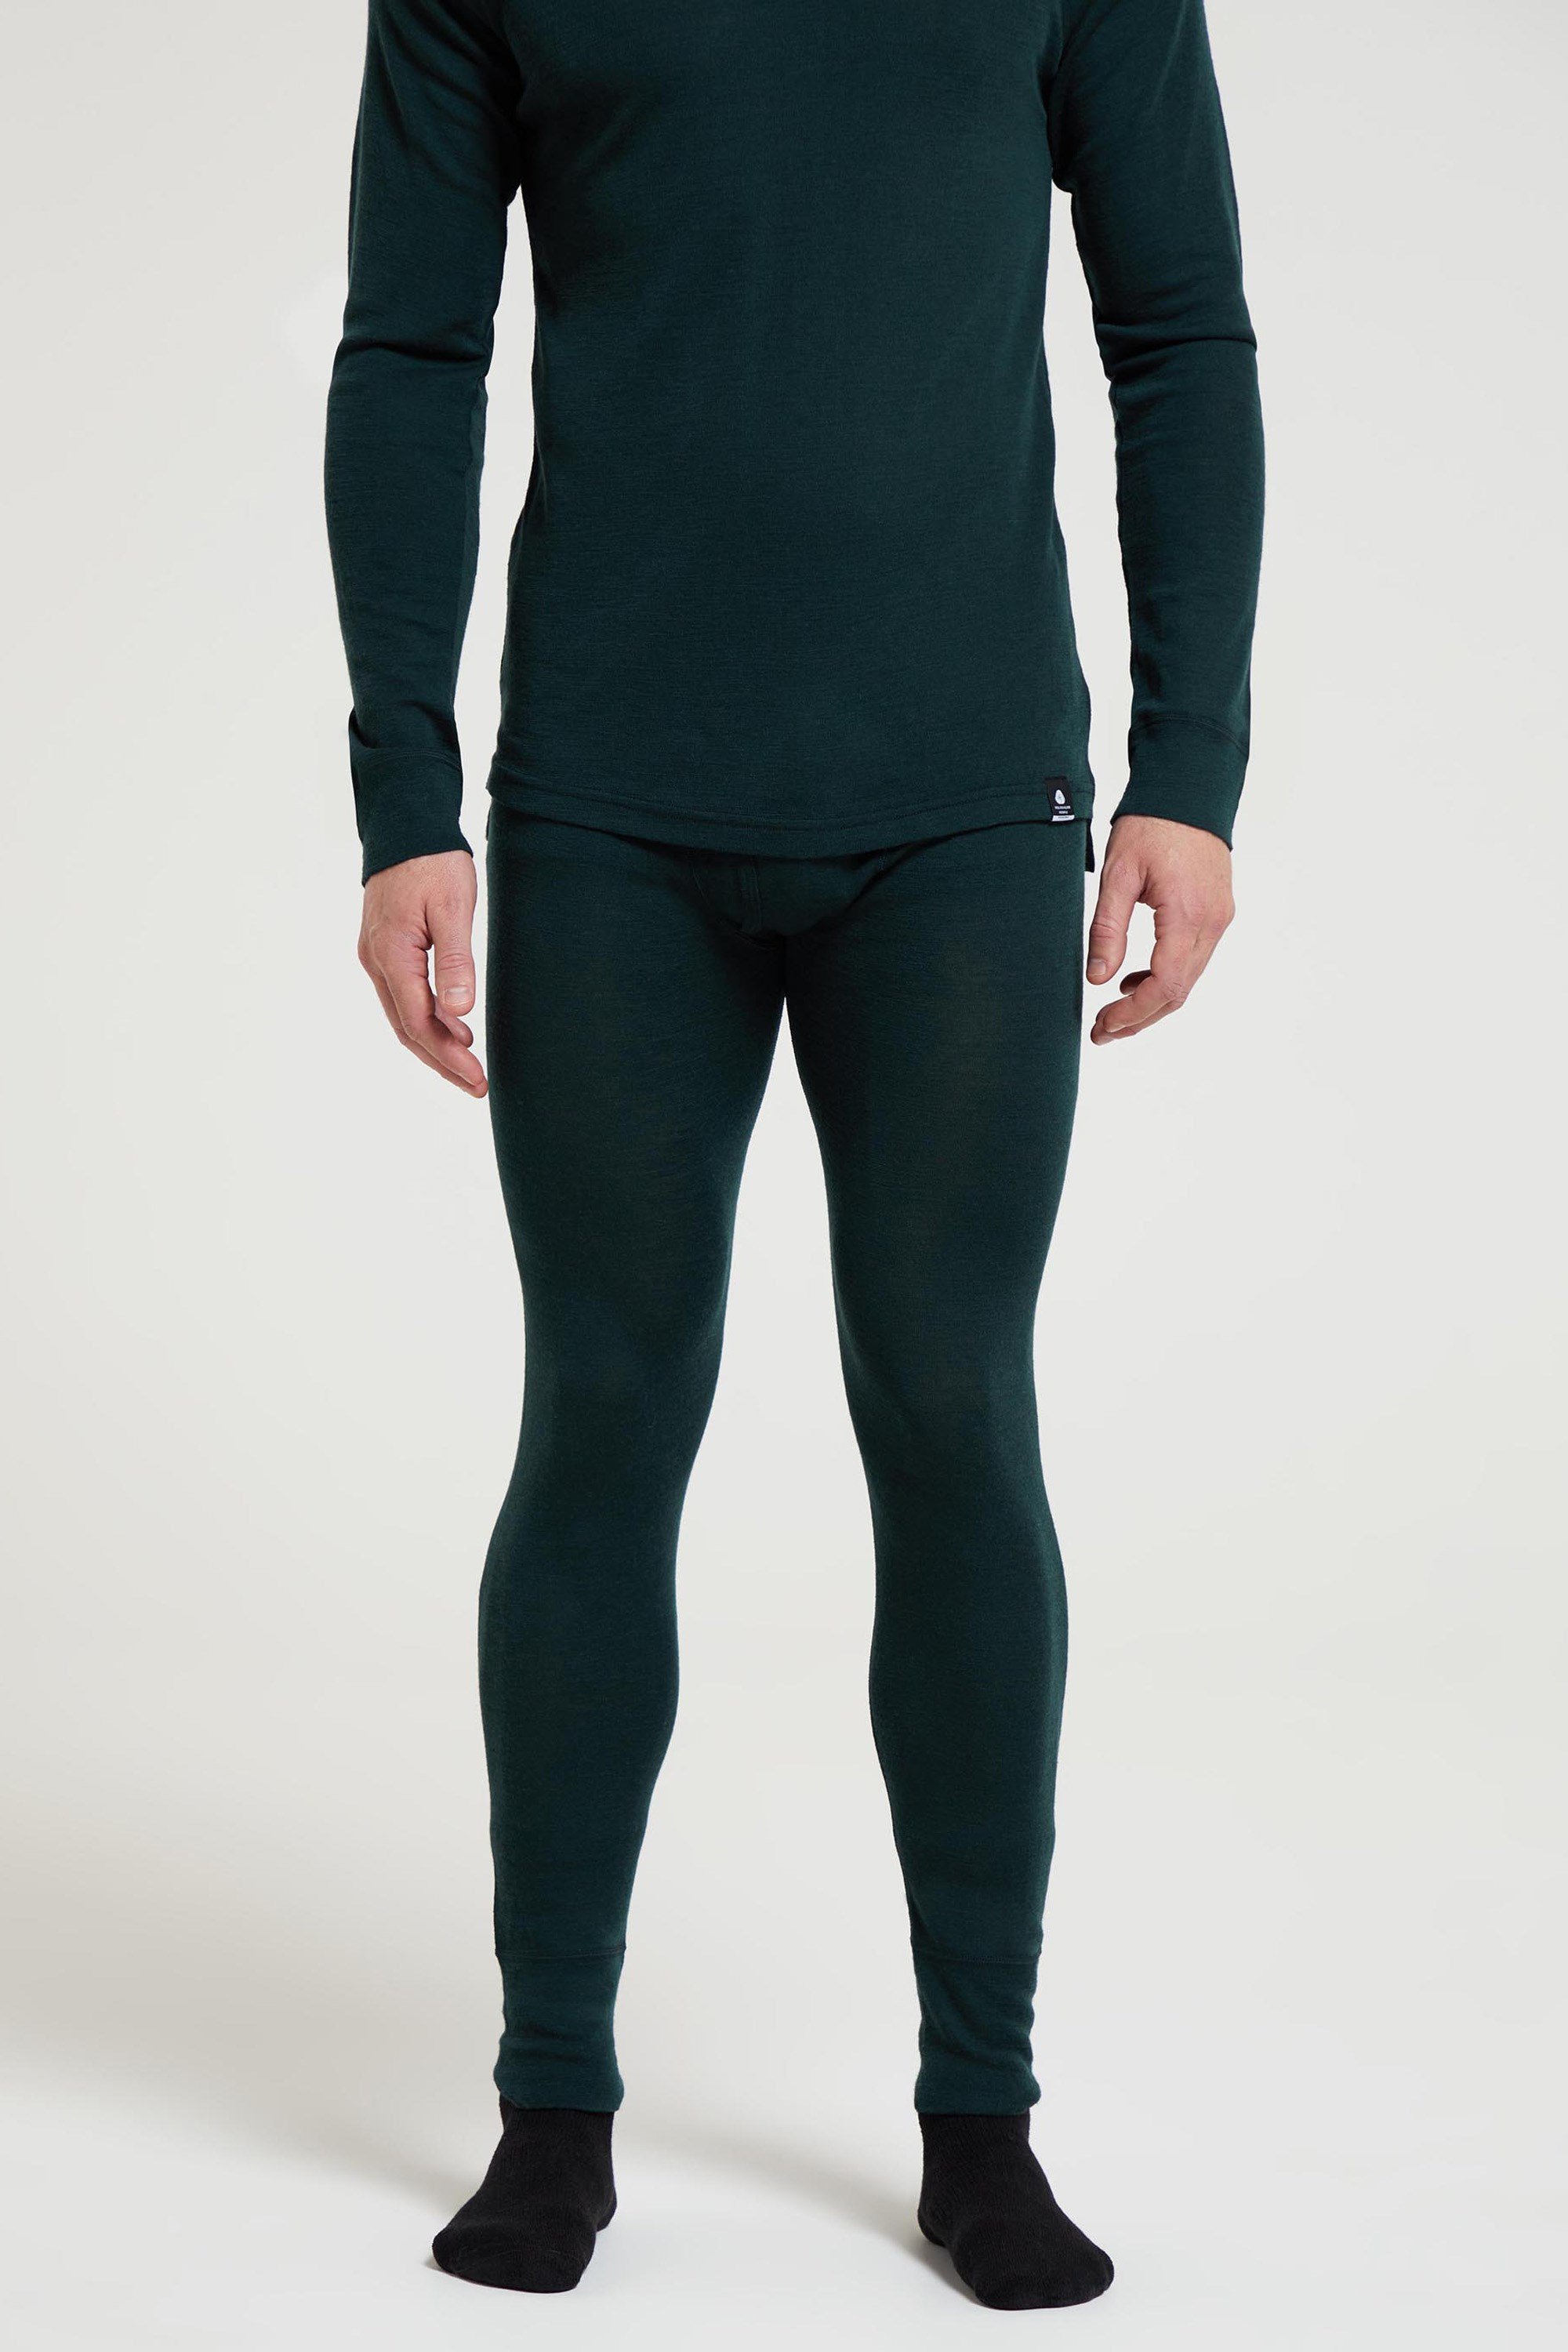 Buy Mountain Warehouse Black Merino Thermal Pants with Fly - Mens from Next  USA